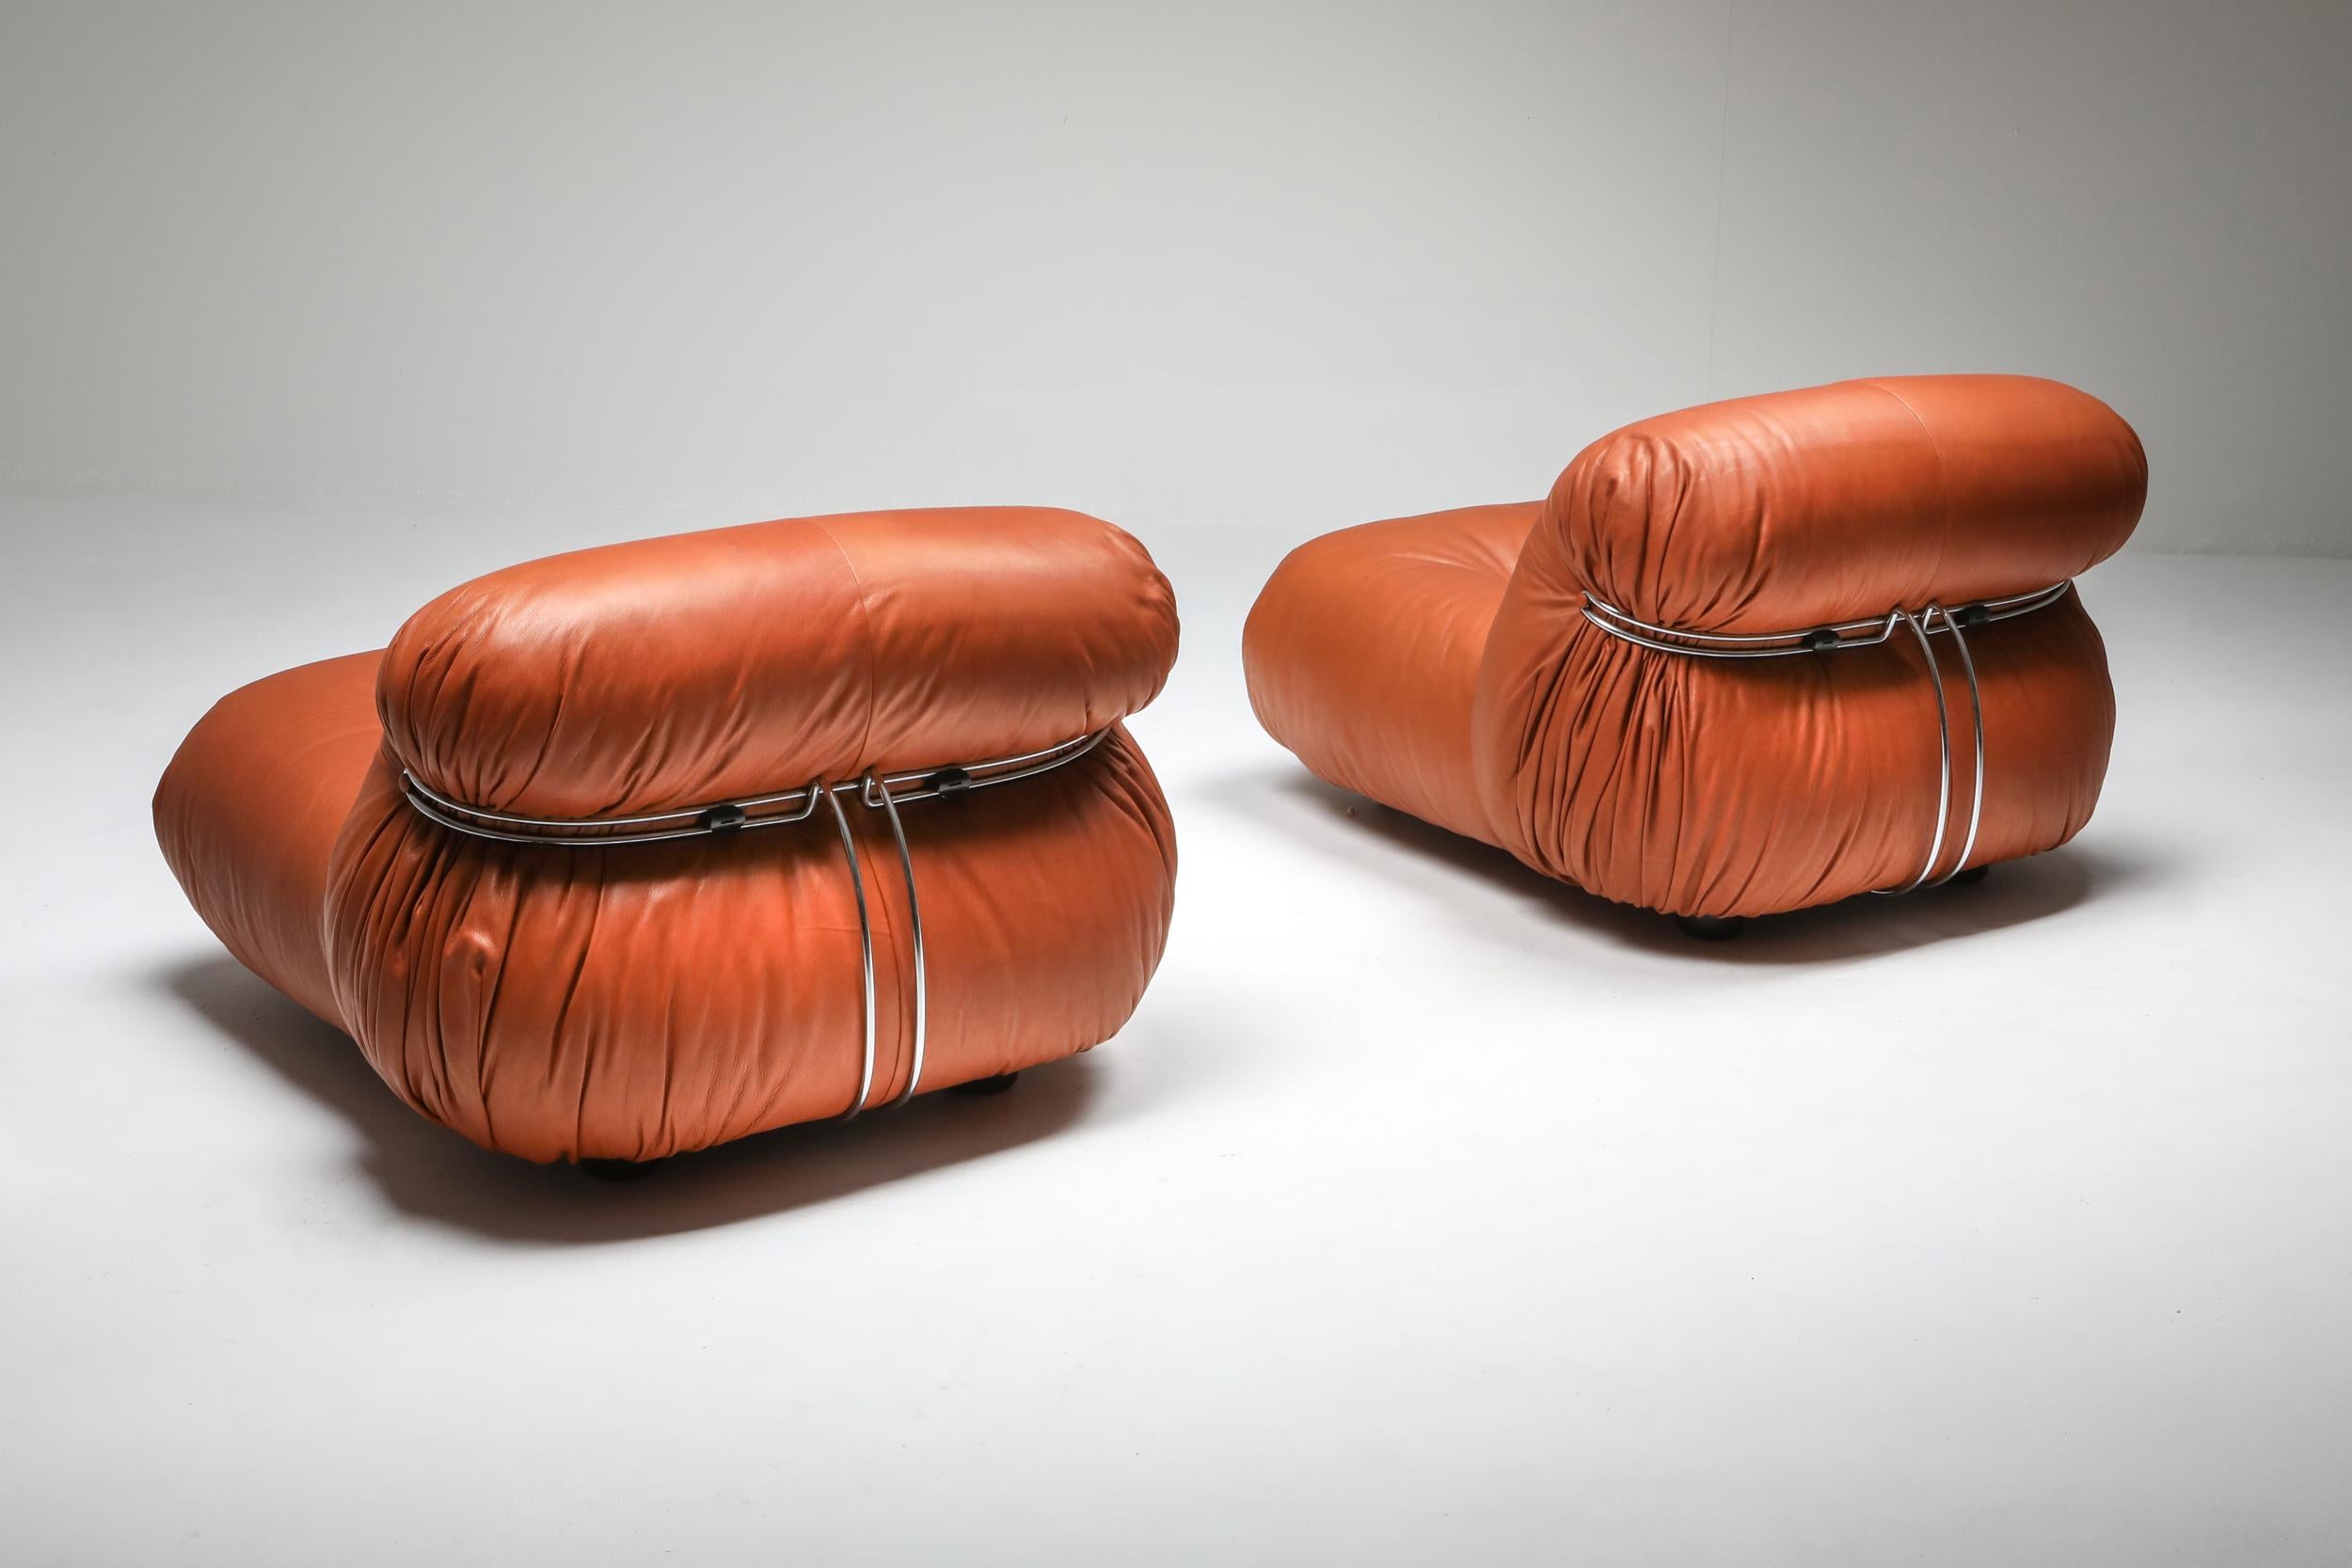 Italian Cassina 'Soriana' Pair of Lounge Chairs by Afra and Tobia Scarpa, 1970's